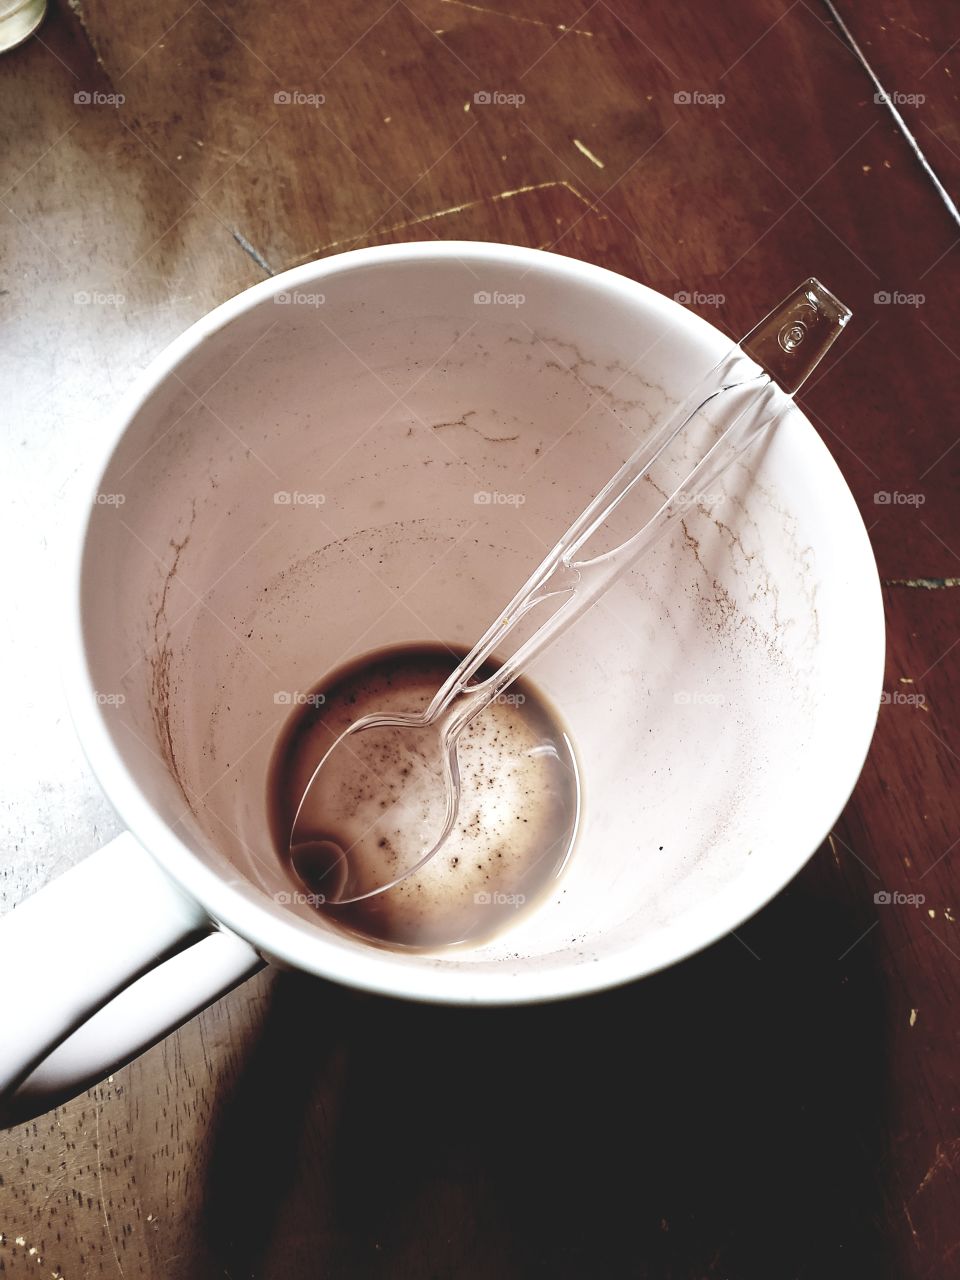 Empty coffee cup with a spoon on a wooden breakfast table, looks like breakfast is over and it's time to start our morning.